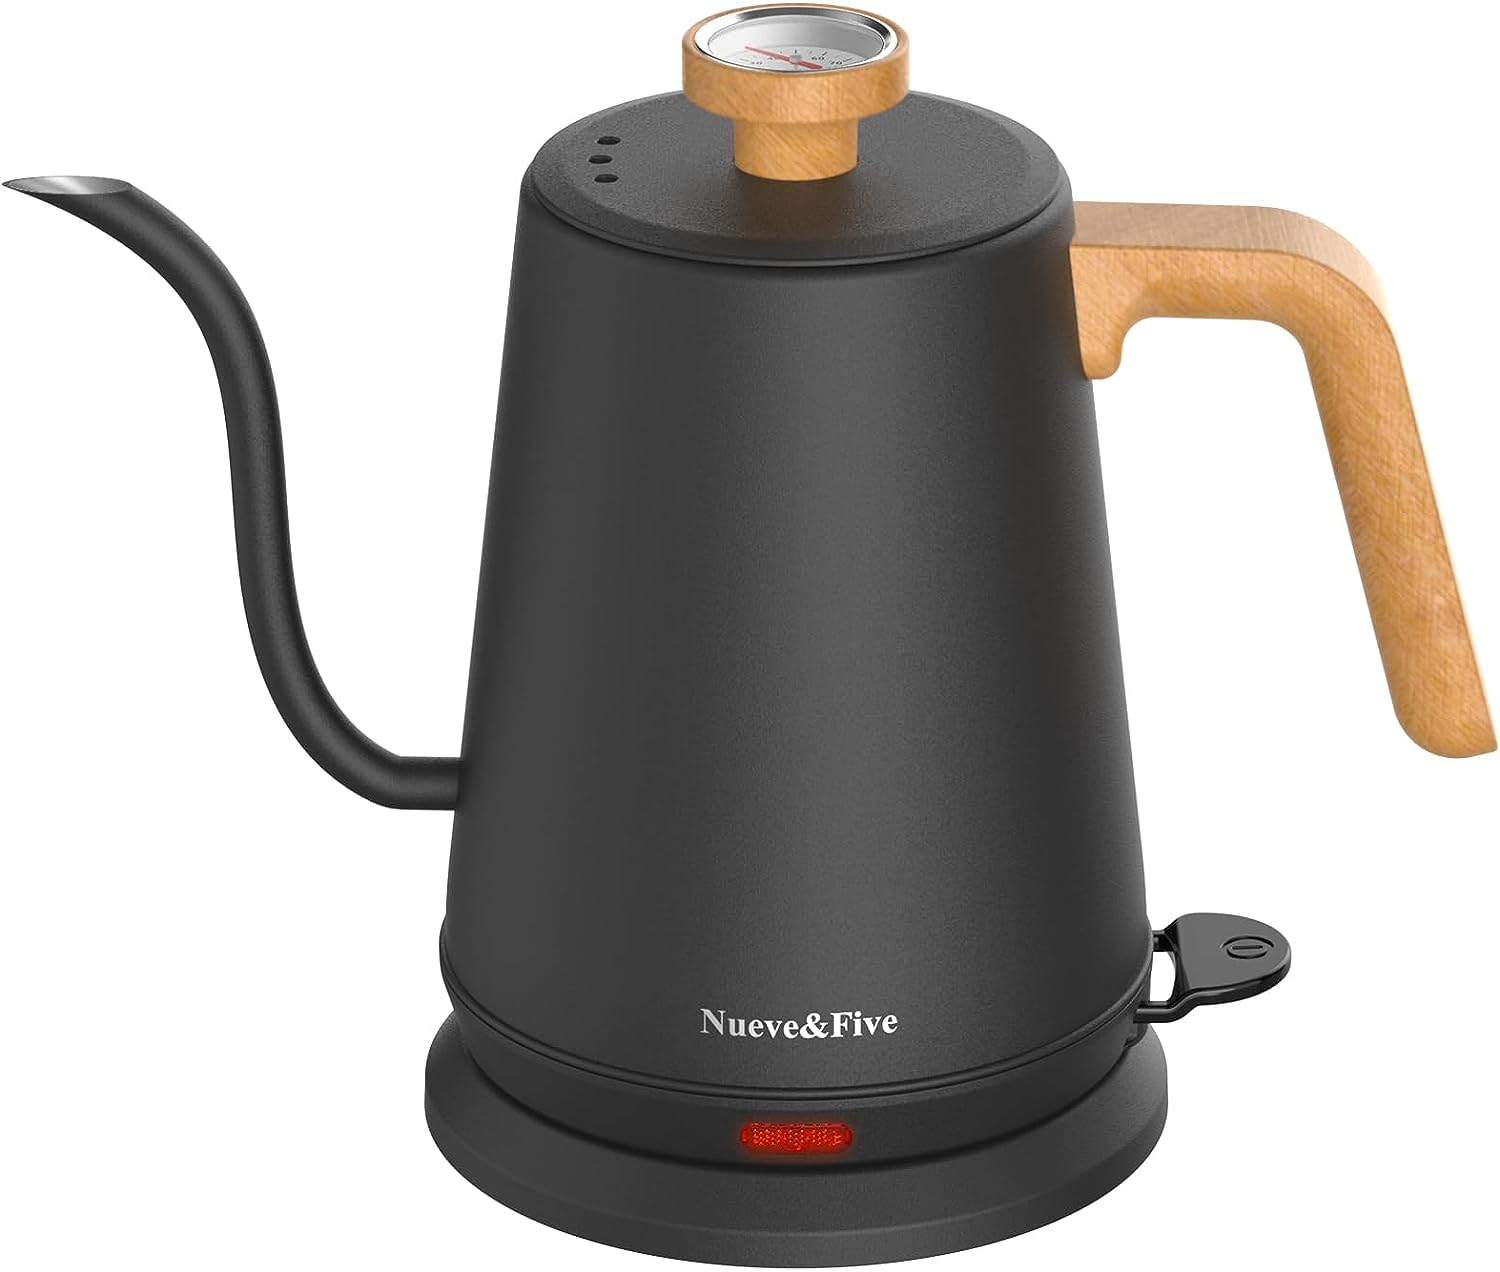 NueveFive Gooseneck Electric Kettle with Thermometer， Black Electric Kettle 1L with Auto Shut-Off，1000W Hot Water Kettle of Stainless Steel， Pour Over Kettle for Coffee  Tea